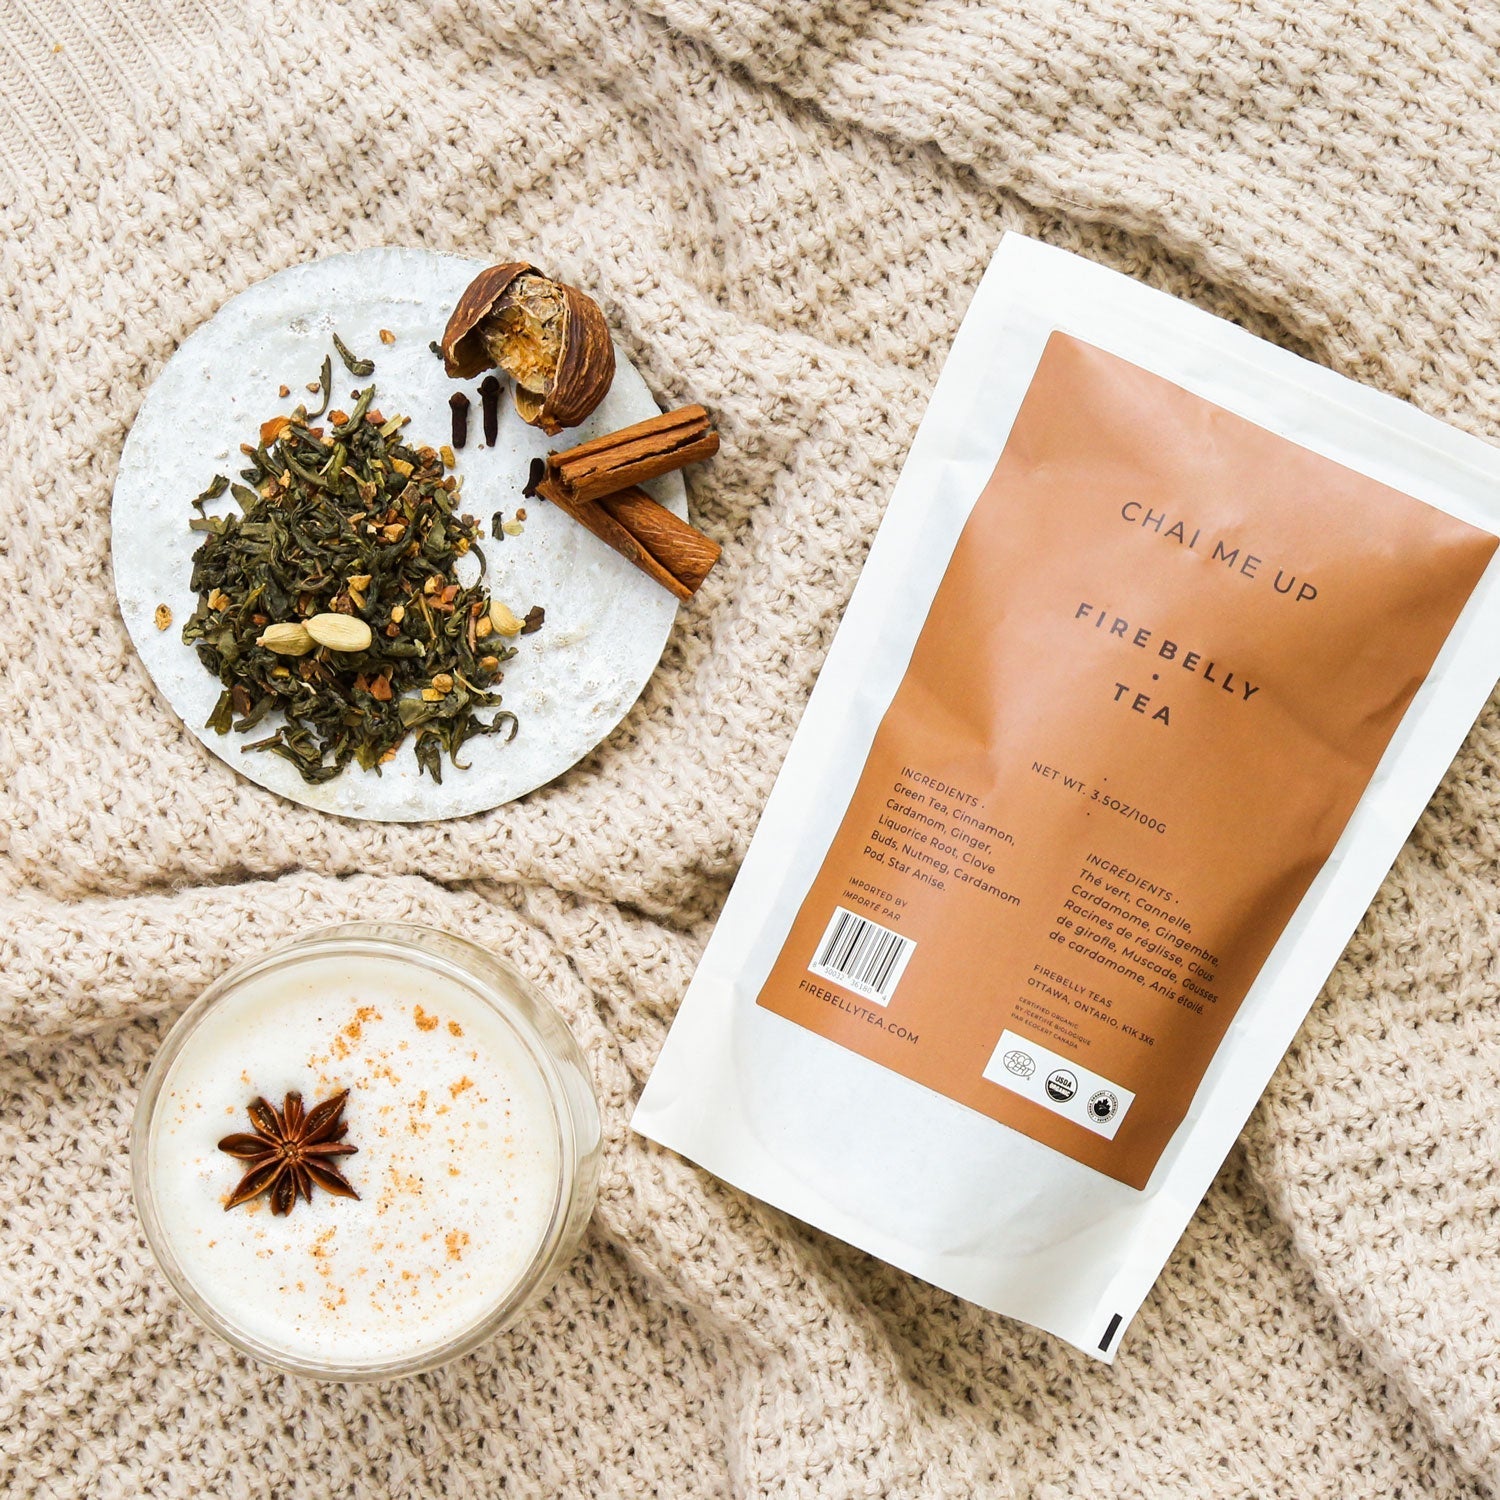 Chai Me Up by Firebelly Tea